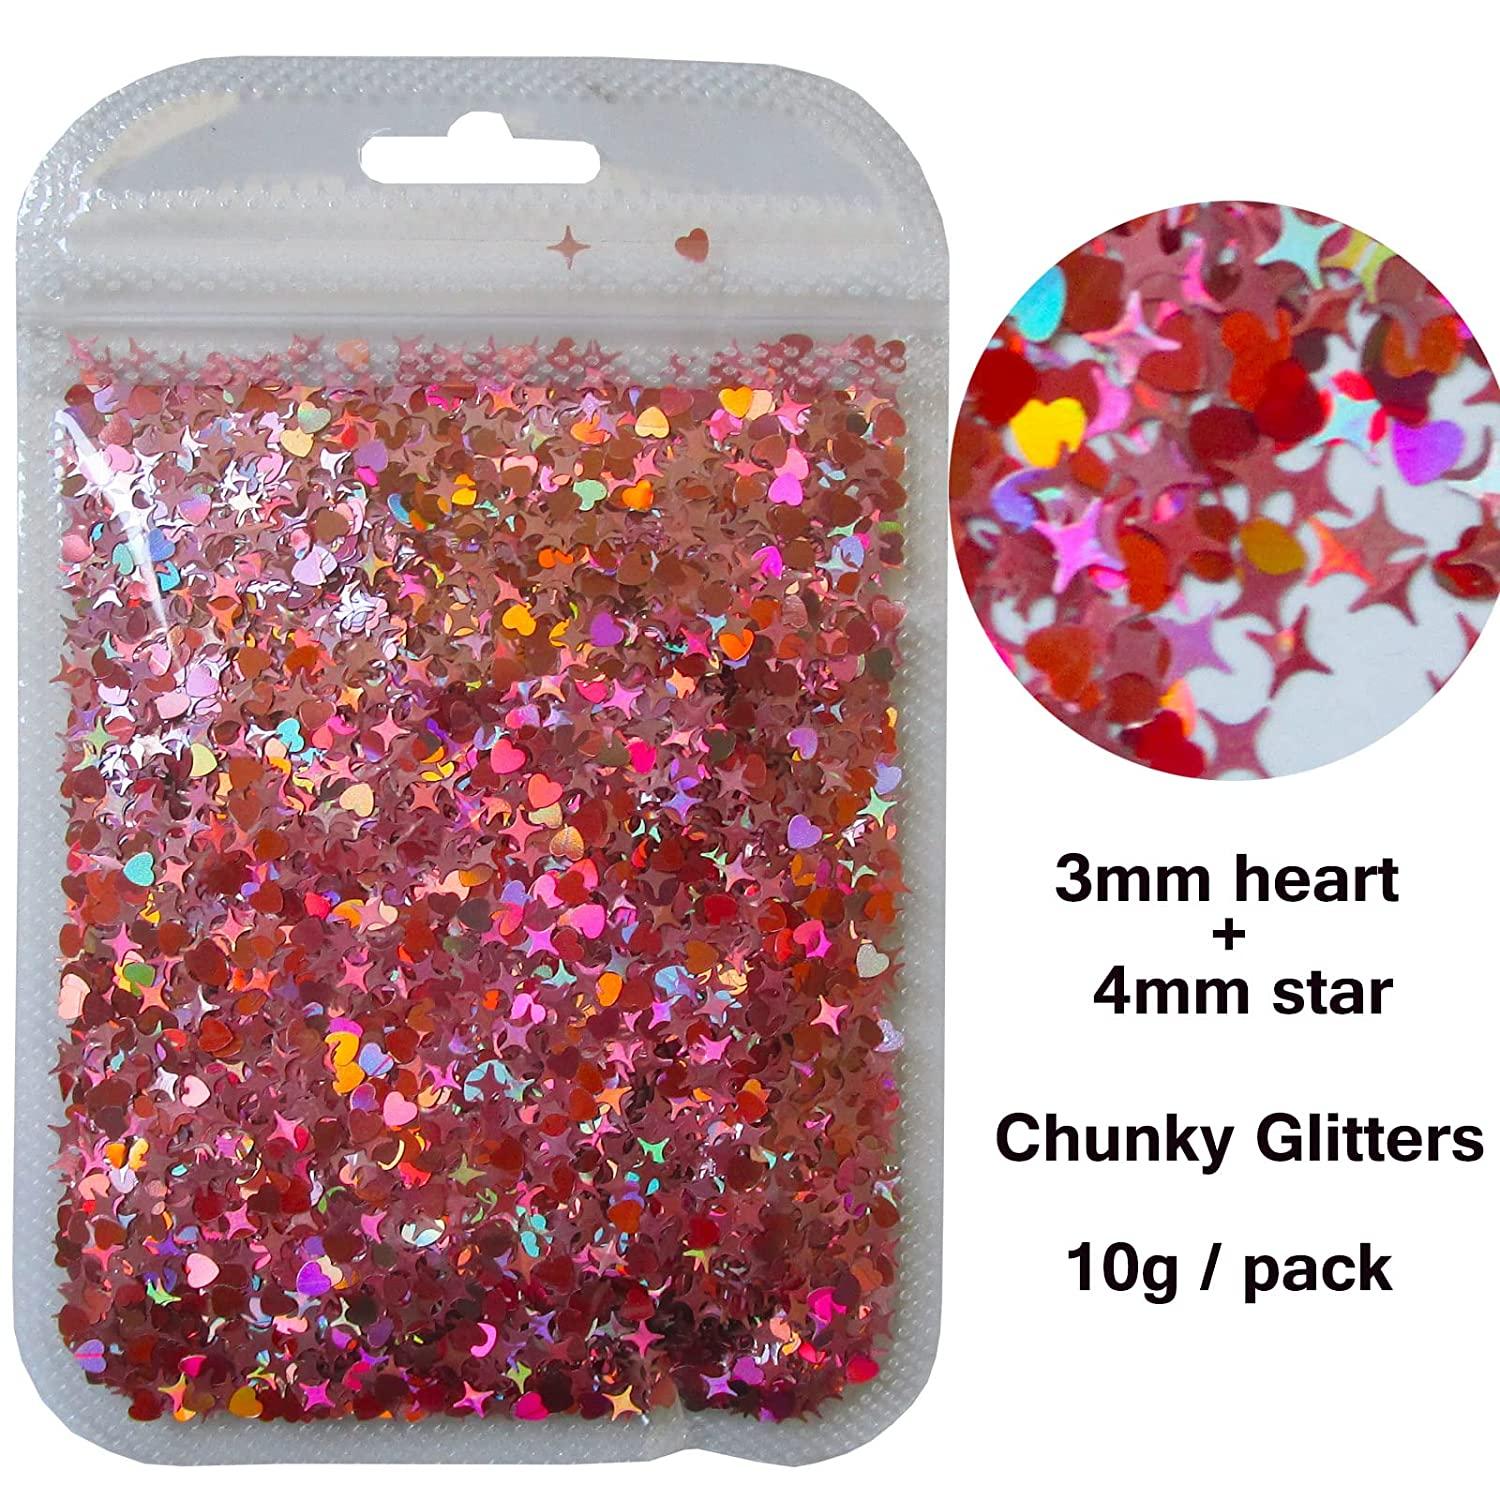 Red Chunky Glitter, Cheery Cherry Chunky Mix Holographic Glitter – The  Blank Pineapple